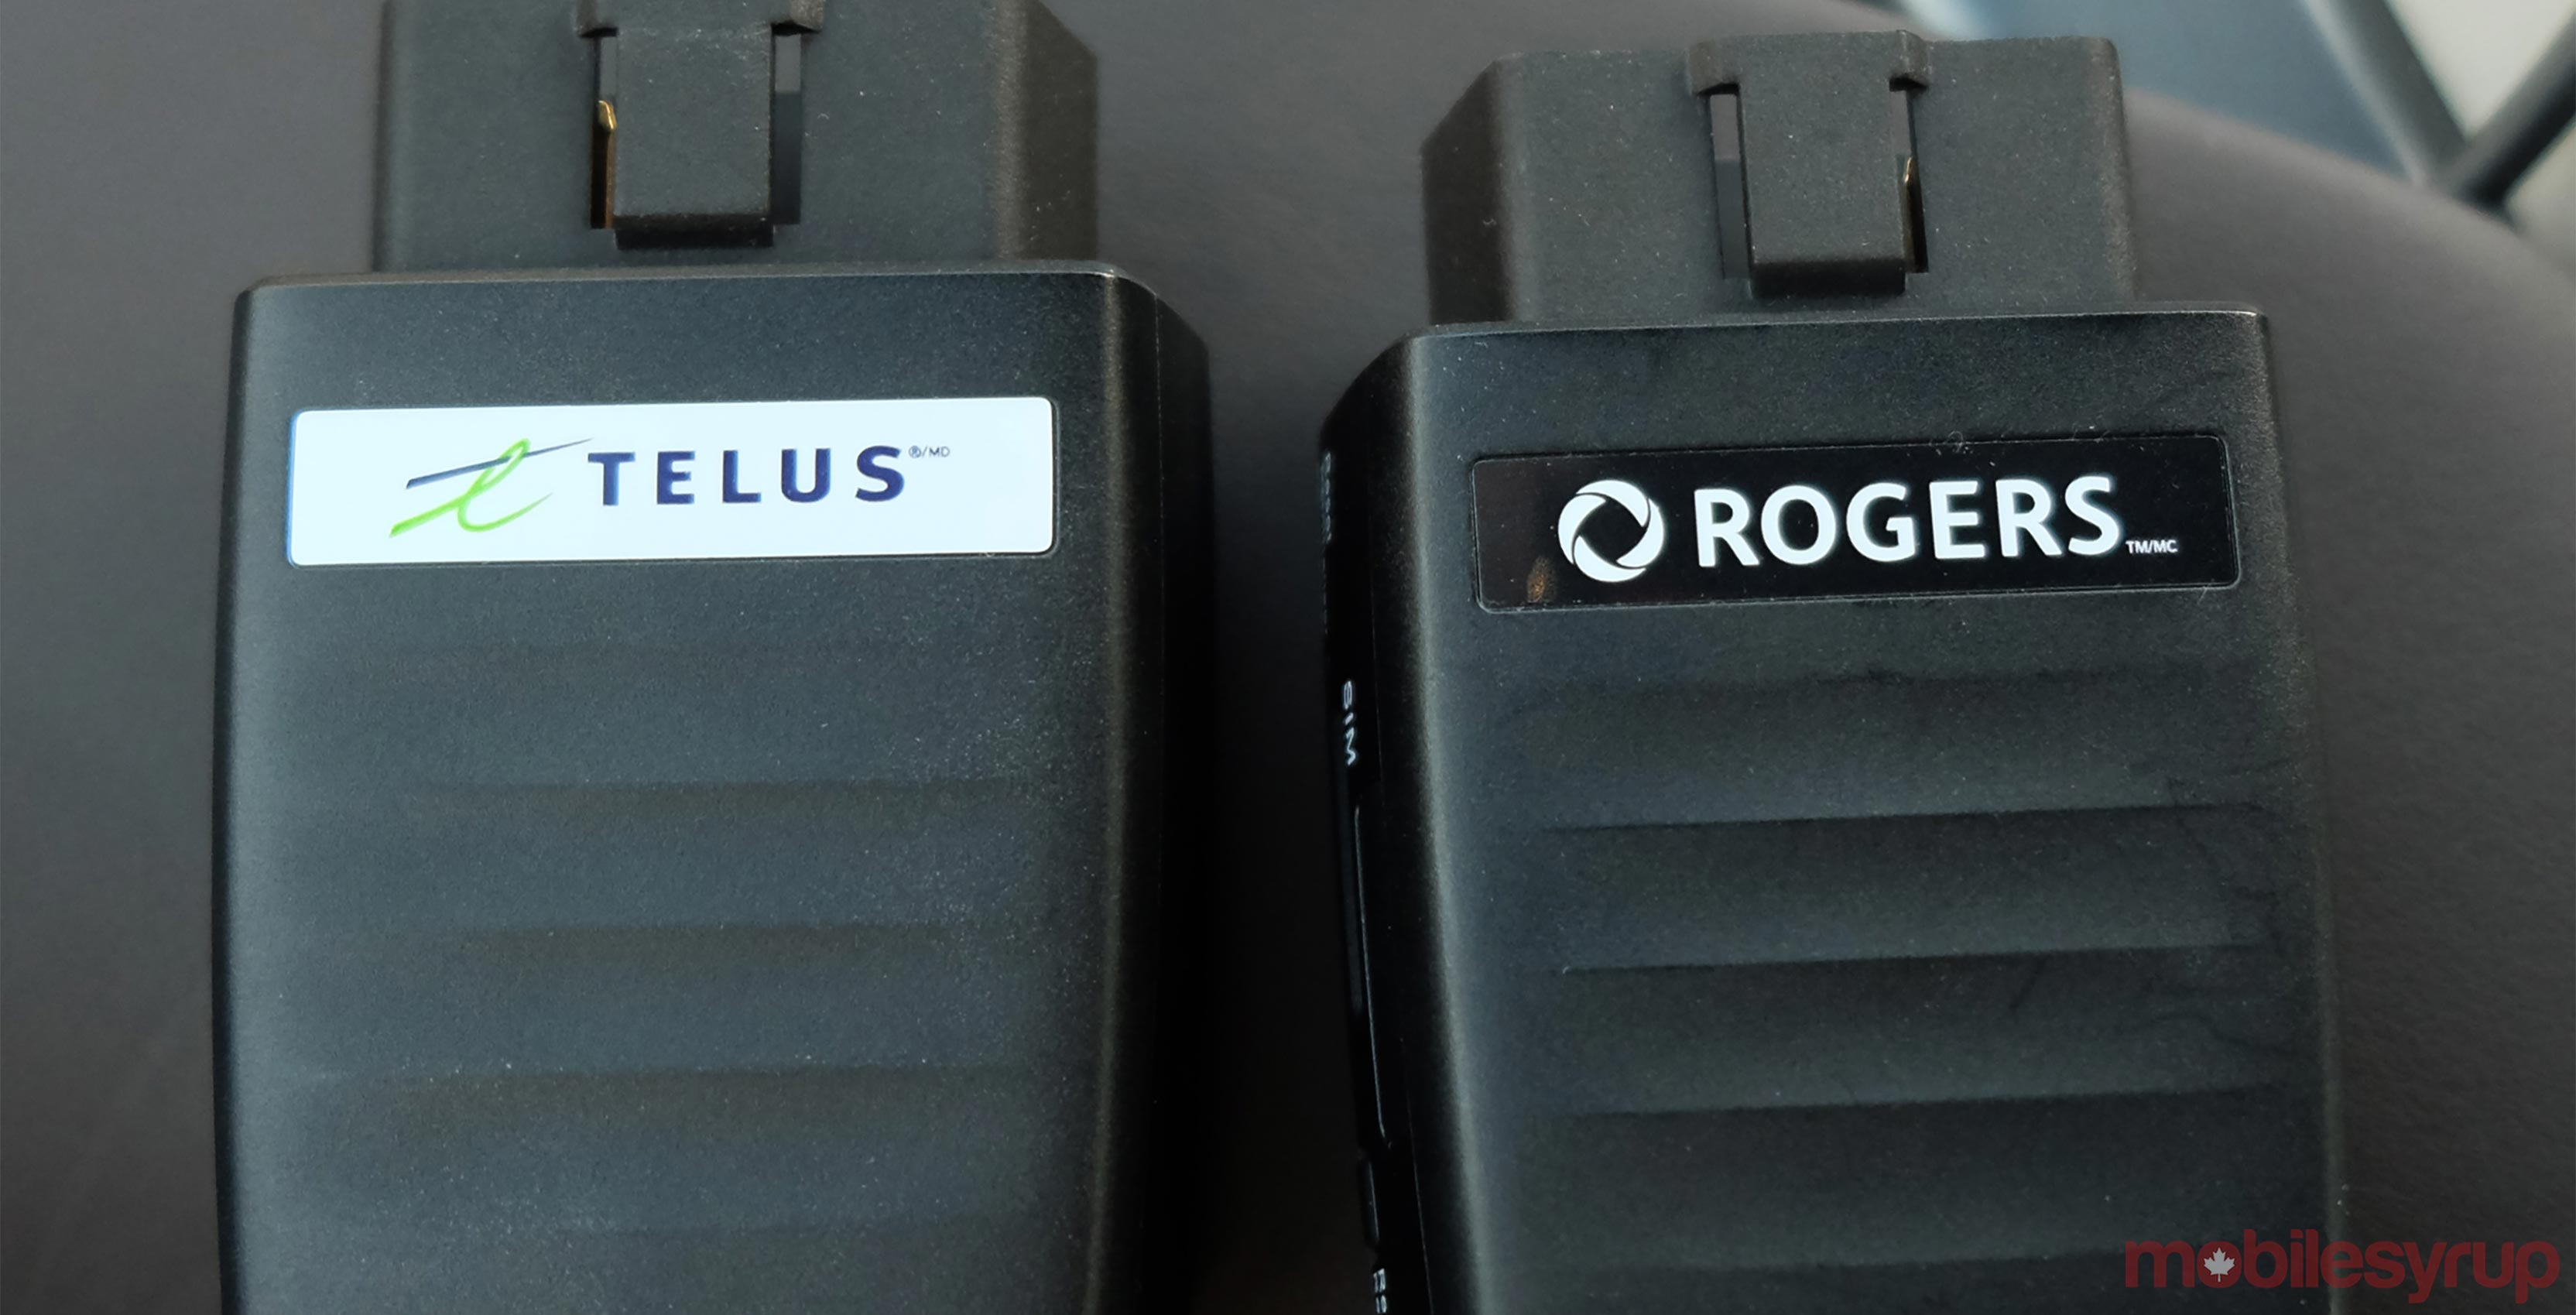 Telus and Rogers units